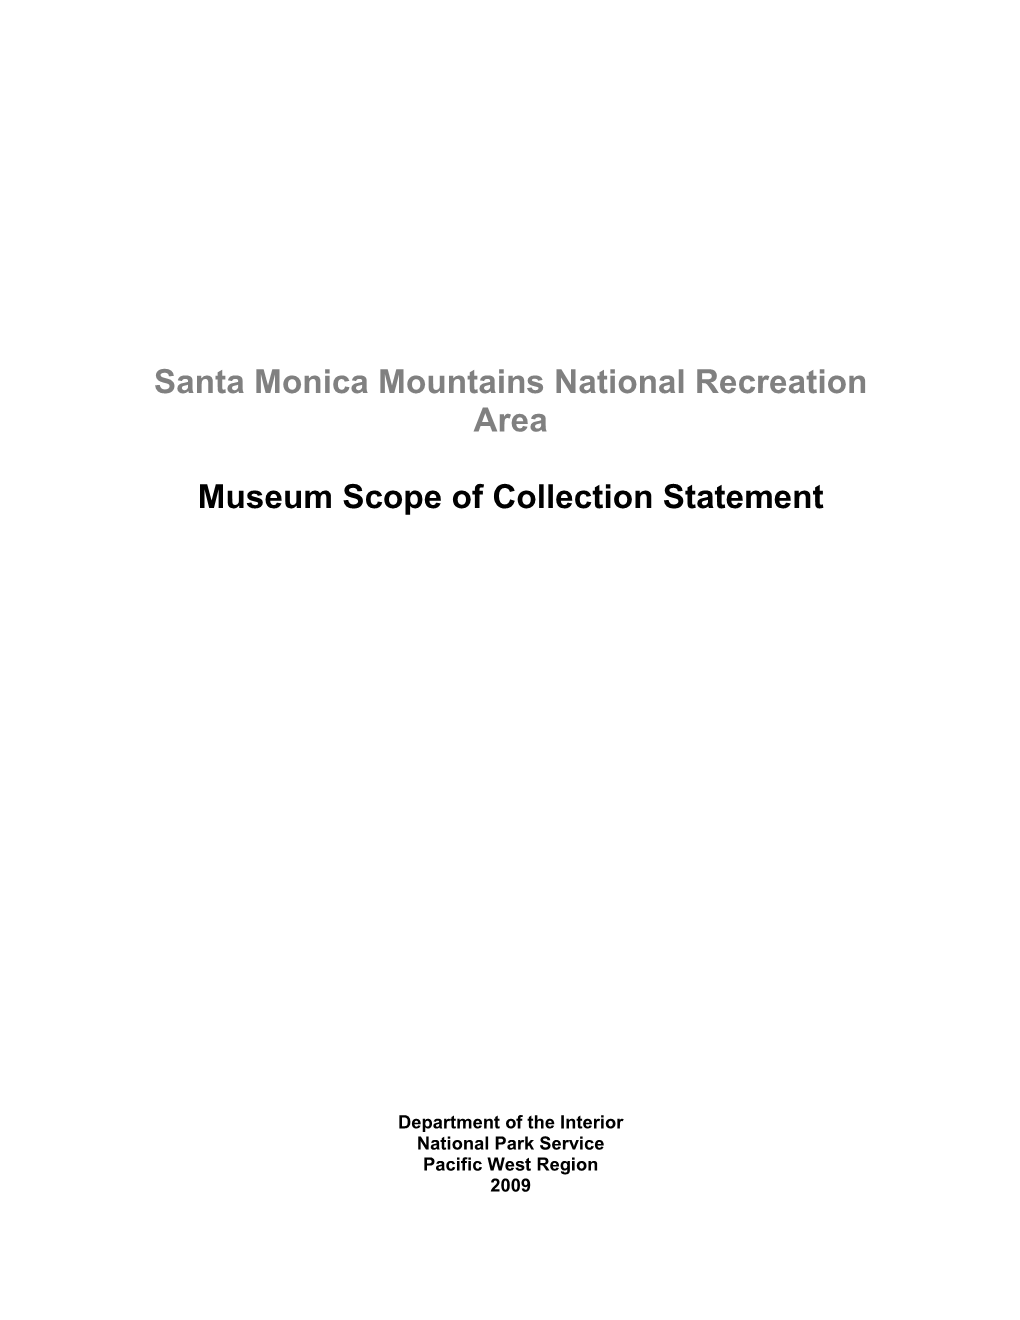 Museum Scope of Collection Statement, 2009